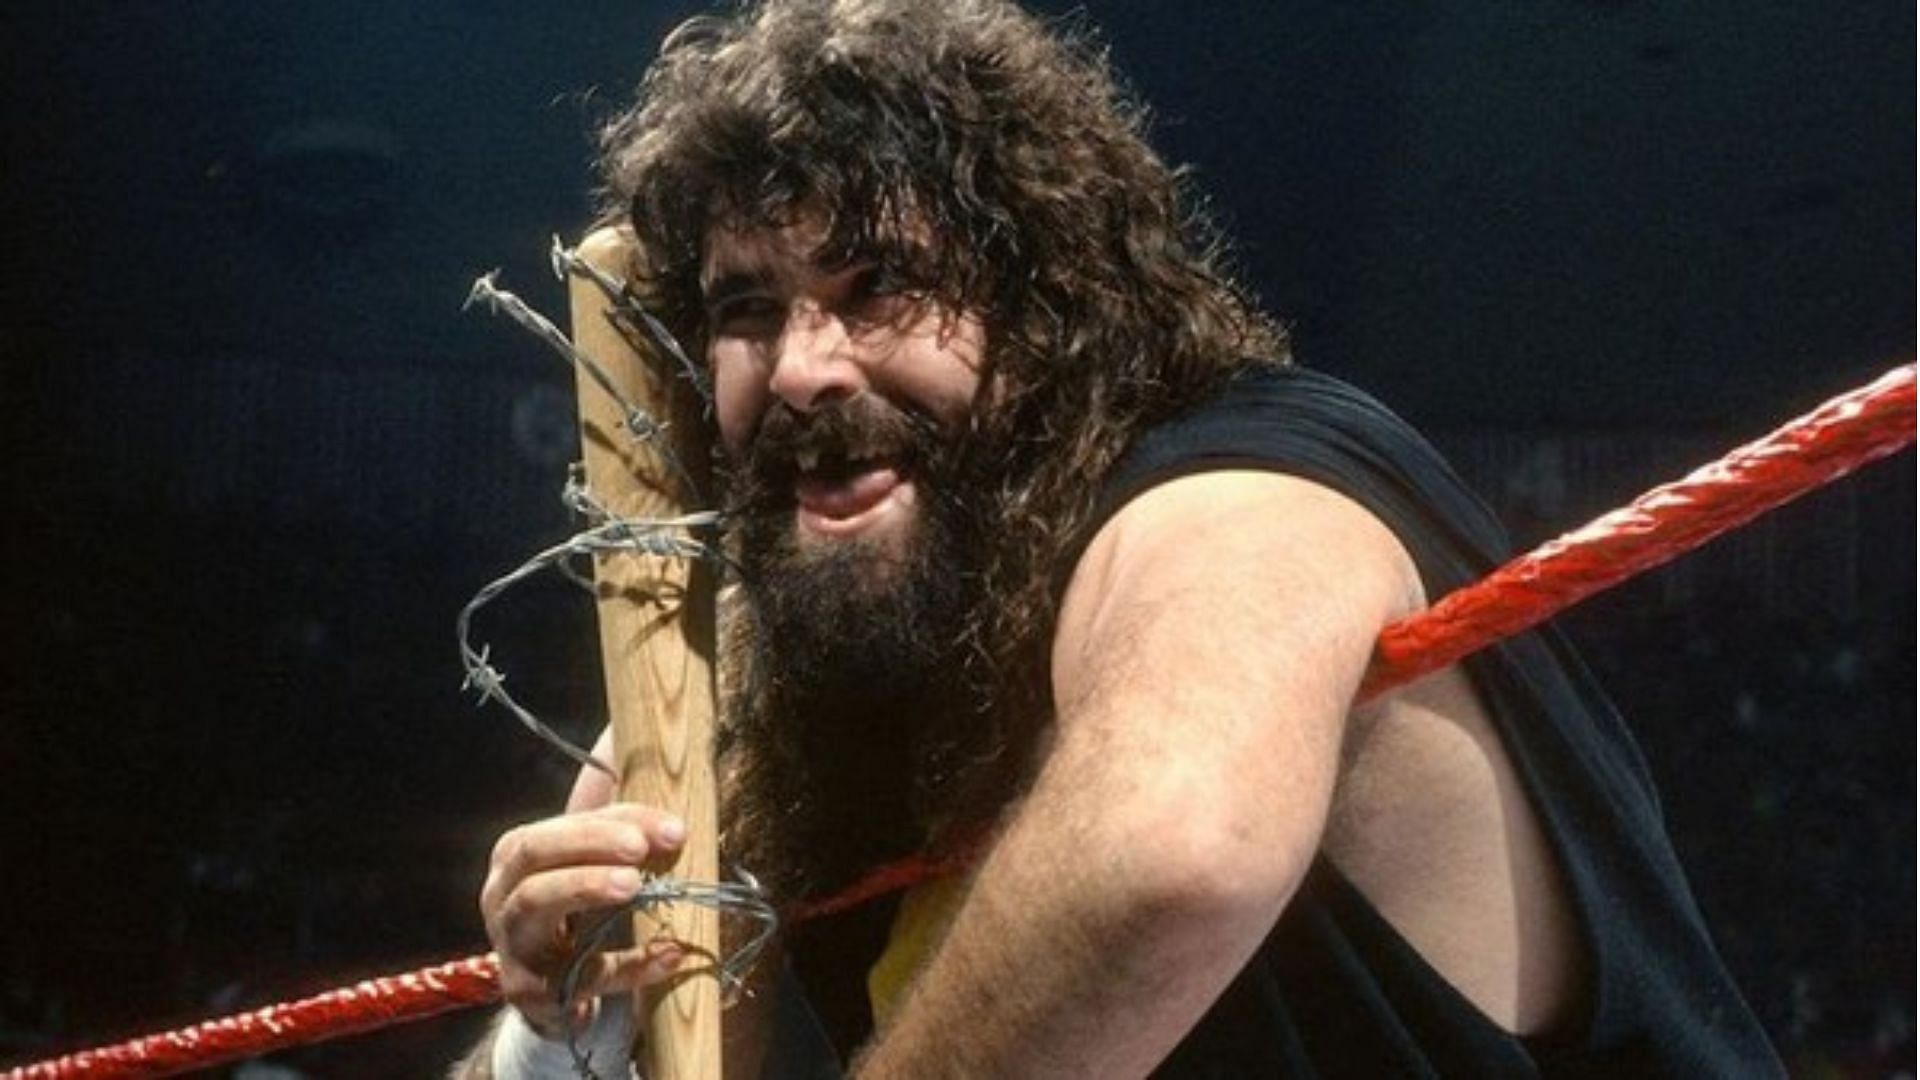 Mick Foley as Cactus Jack with his trusted &quot;Barbie&quot;